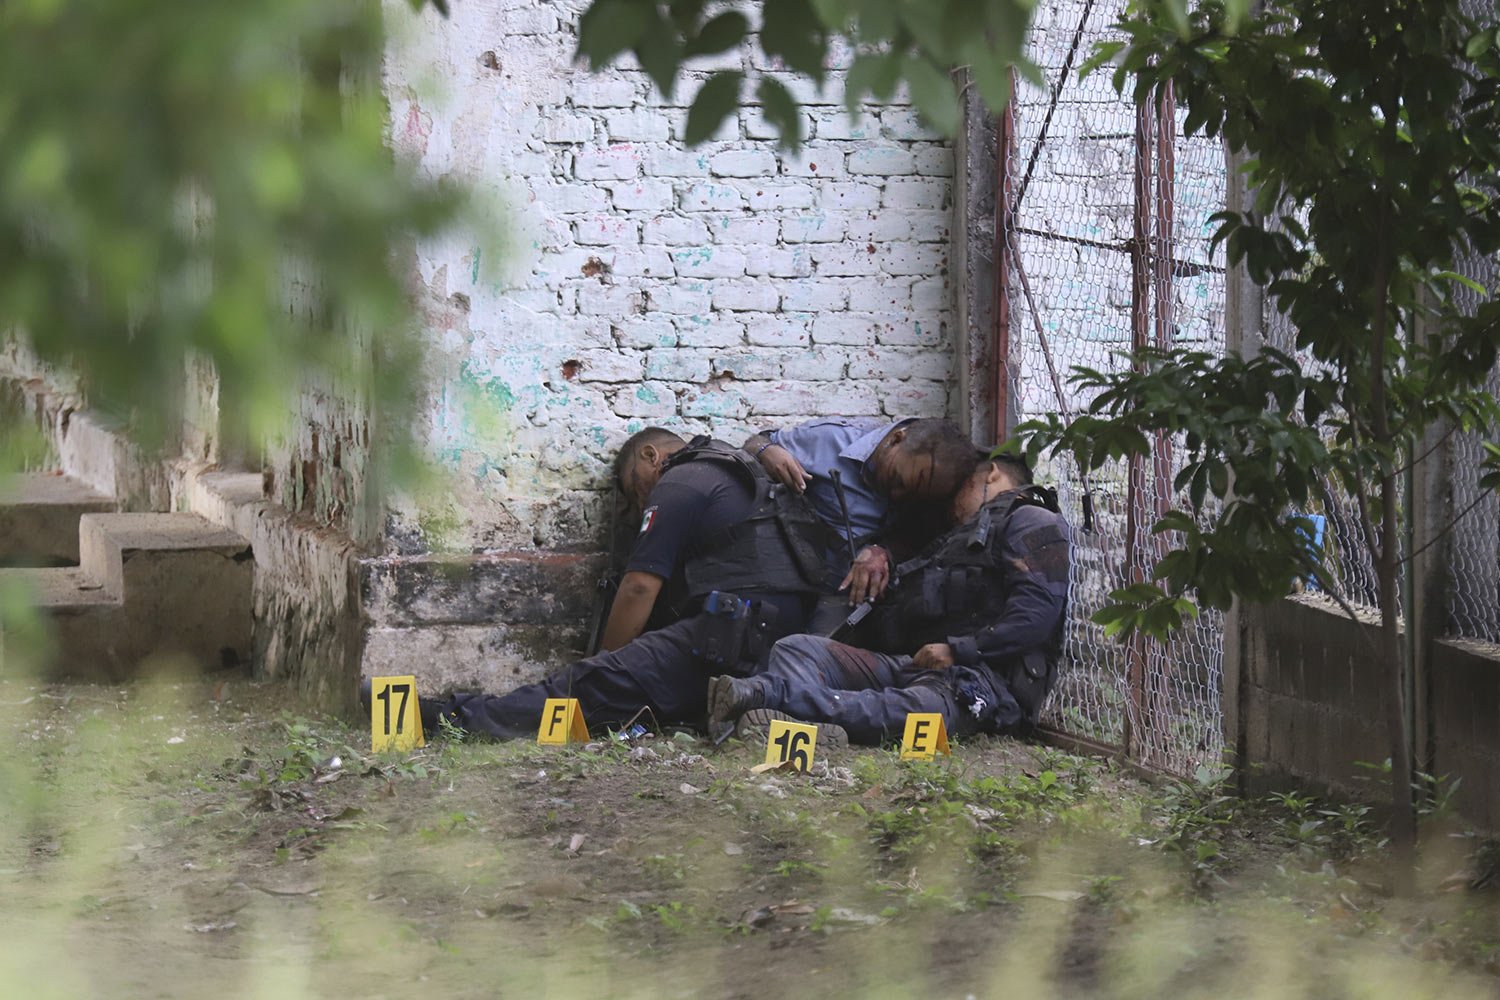  The bodies of slain police officers are slumped against a wall in El Papayo, Coyuca de Benitez municipality, Guerrero state, Mexico, Oct. 23, 2023. Twelve police officers and their boss were gunned down, according to Guerrero state prosecutor's offi